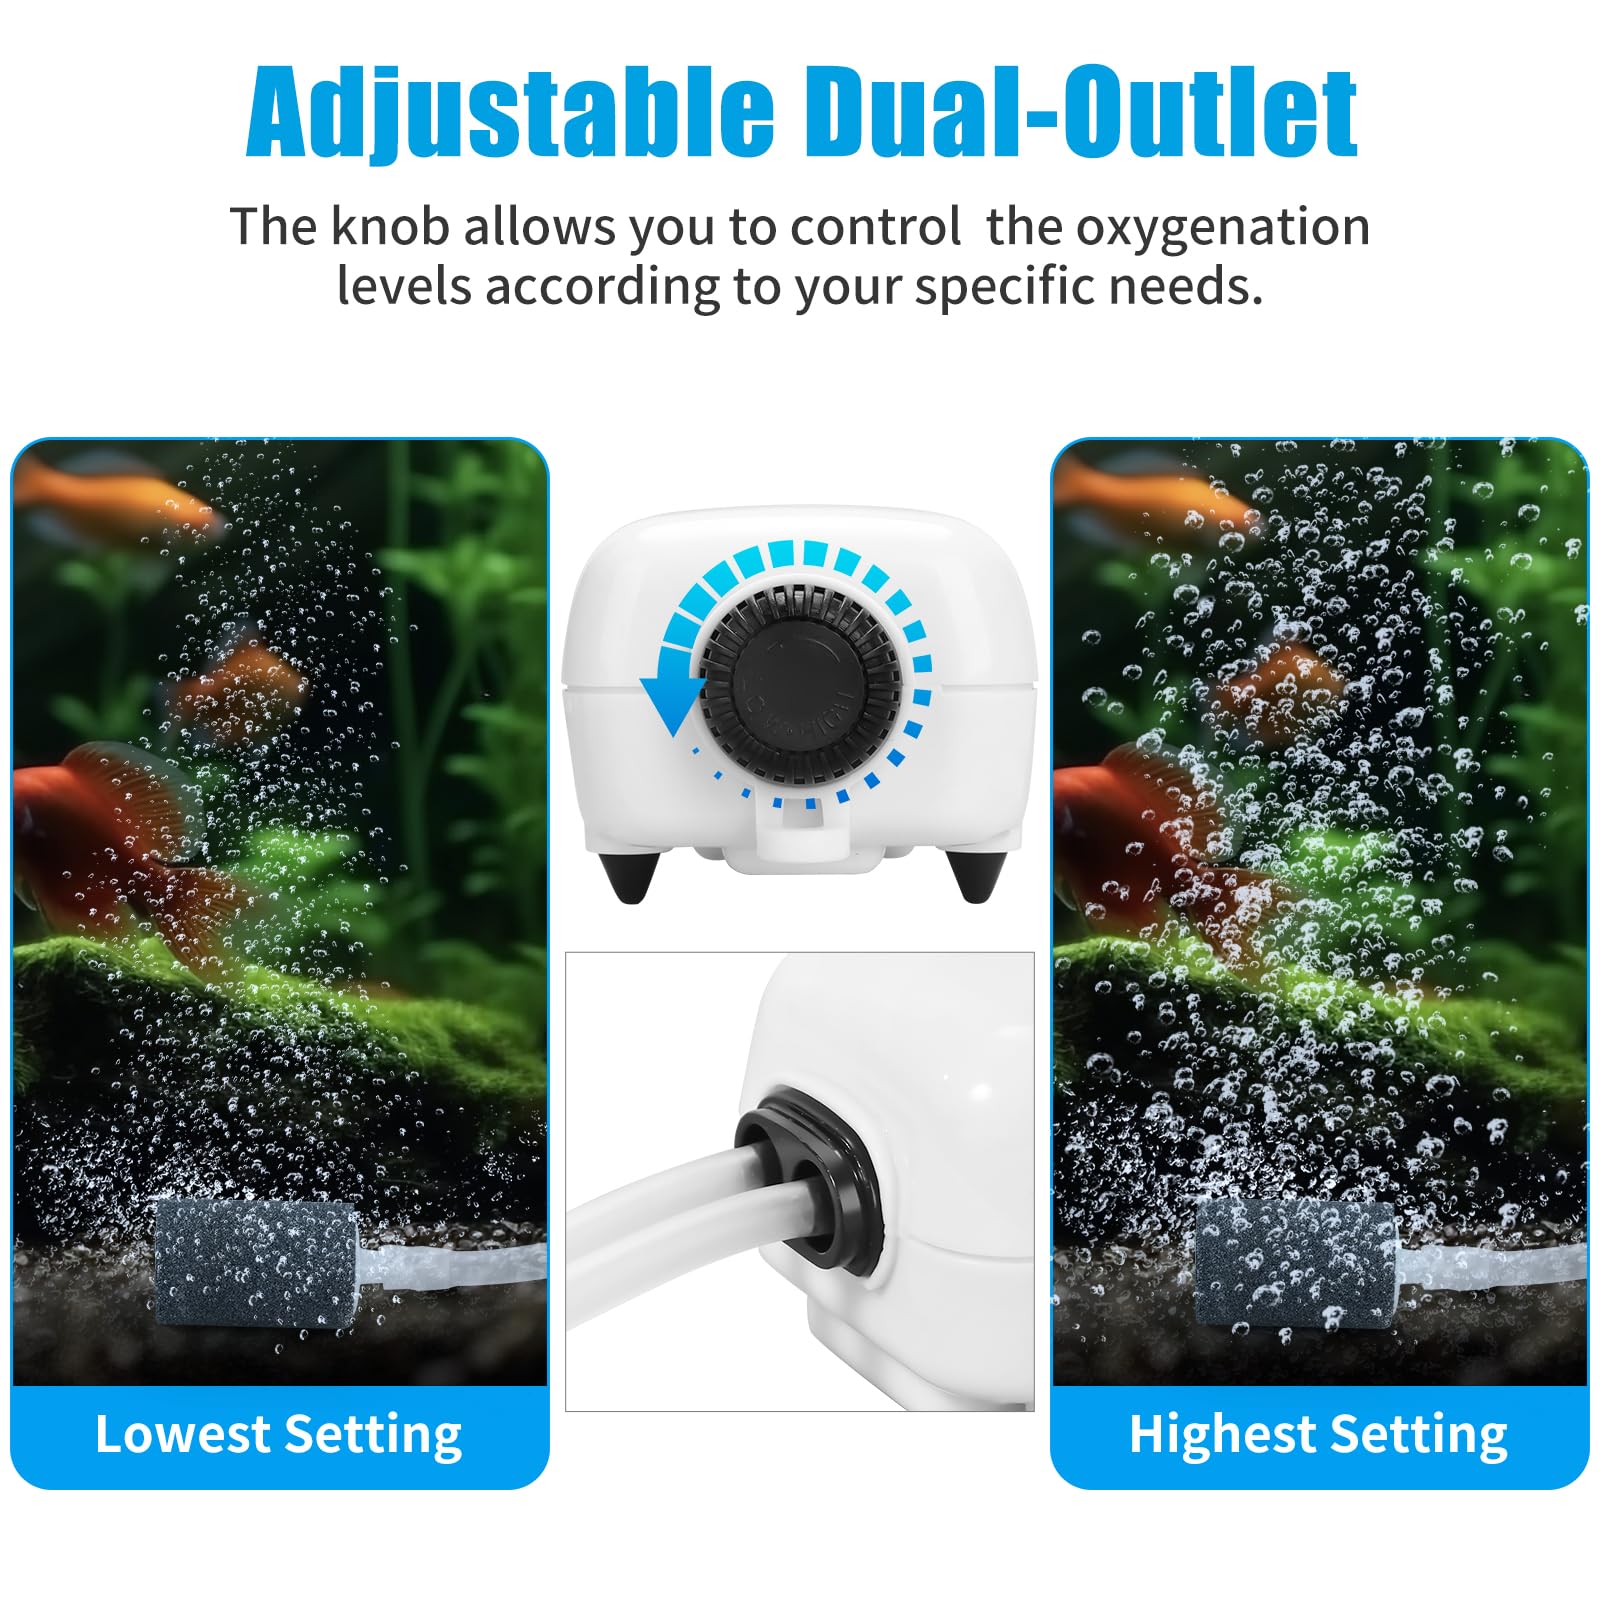 AQUANEAT Aquarium Air Pump, 100gal Fish Tank Air Bubbler, Adjustable Dual-Outlet Hydroponic Oxygen Aerator with Air Stones, Airline Tubing, Check Valves